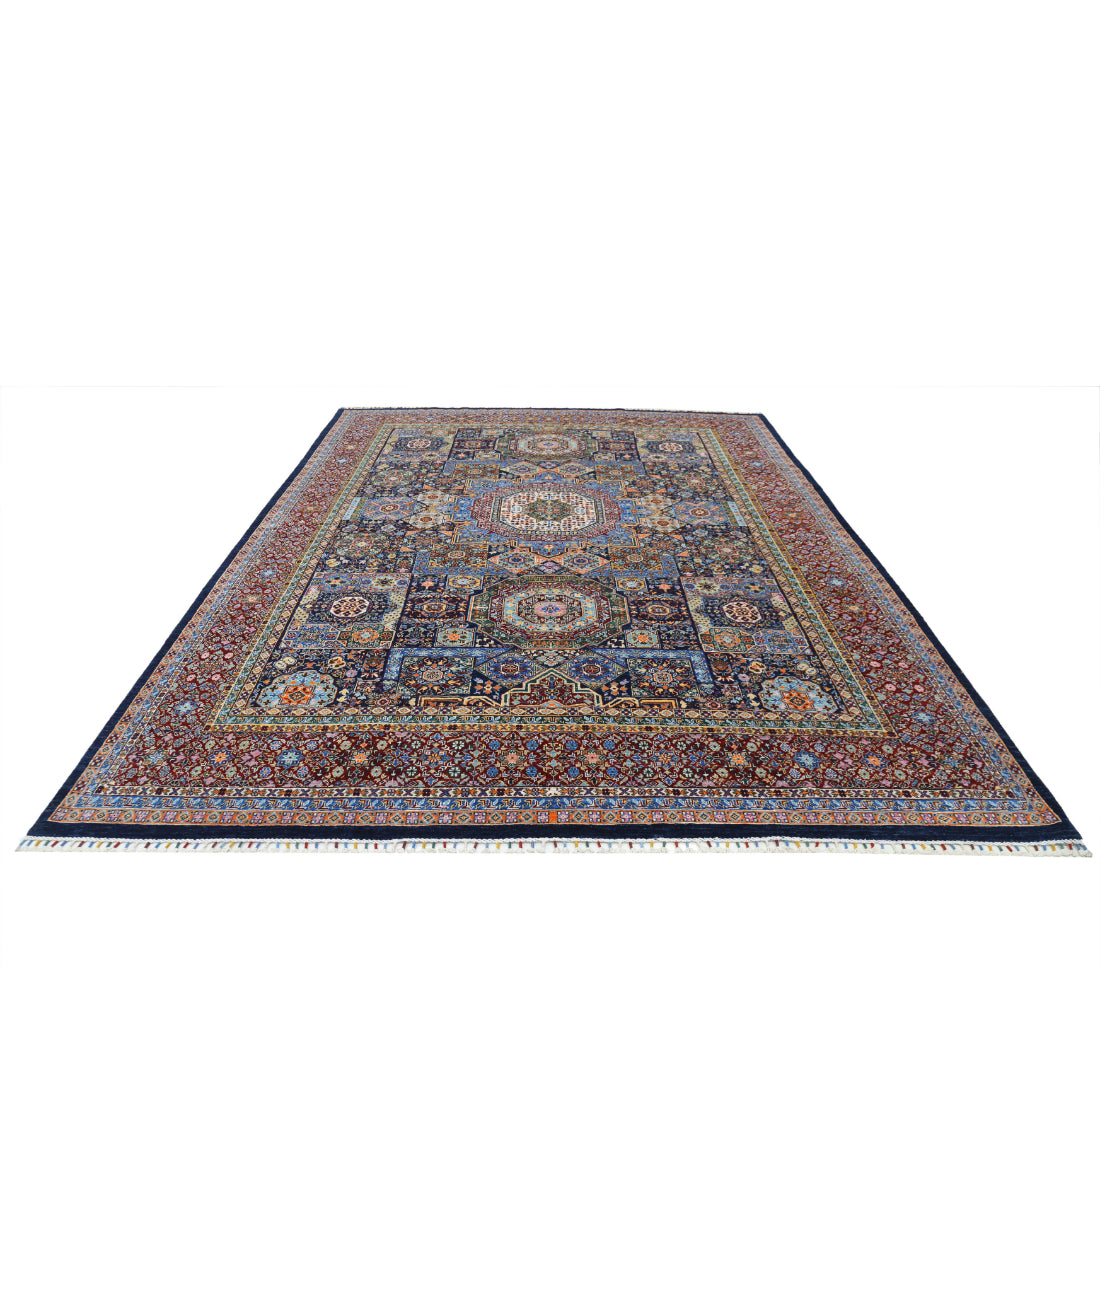 Hand Knotted Mamluk Wool Rug - 8'11'' x 12'1'' 8'11'' x 12'1'' (268 X 363) / Blue / Red